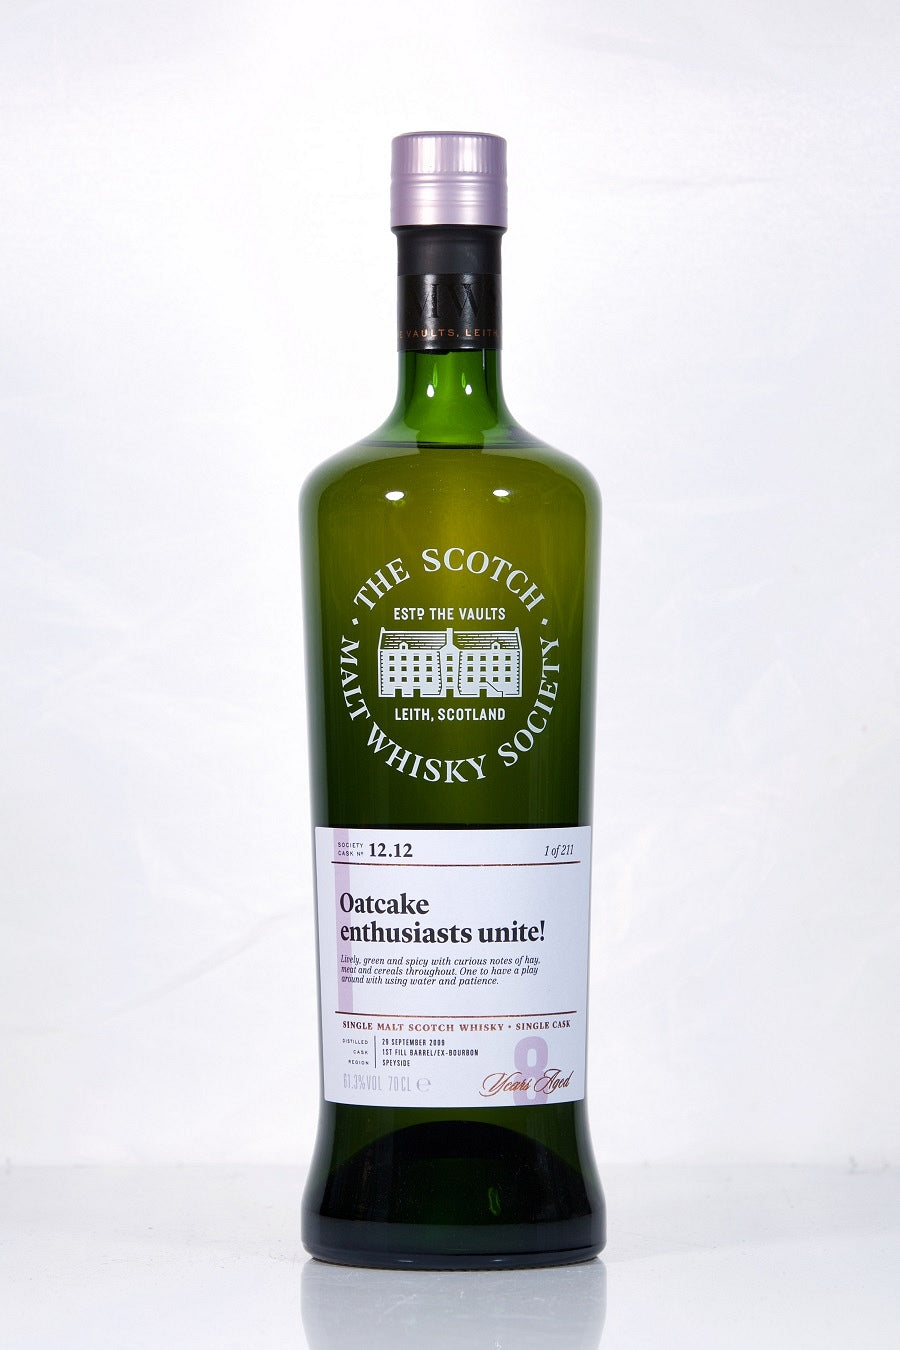 BenRiach 2009 8 Year Old SMWS 12.12 - Oatcake enthusiats unite!